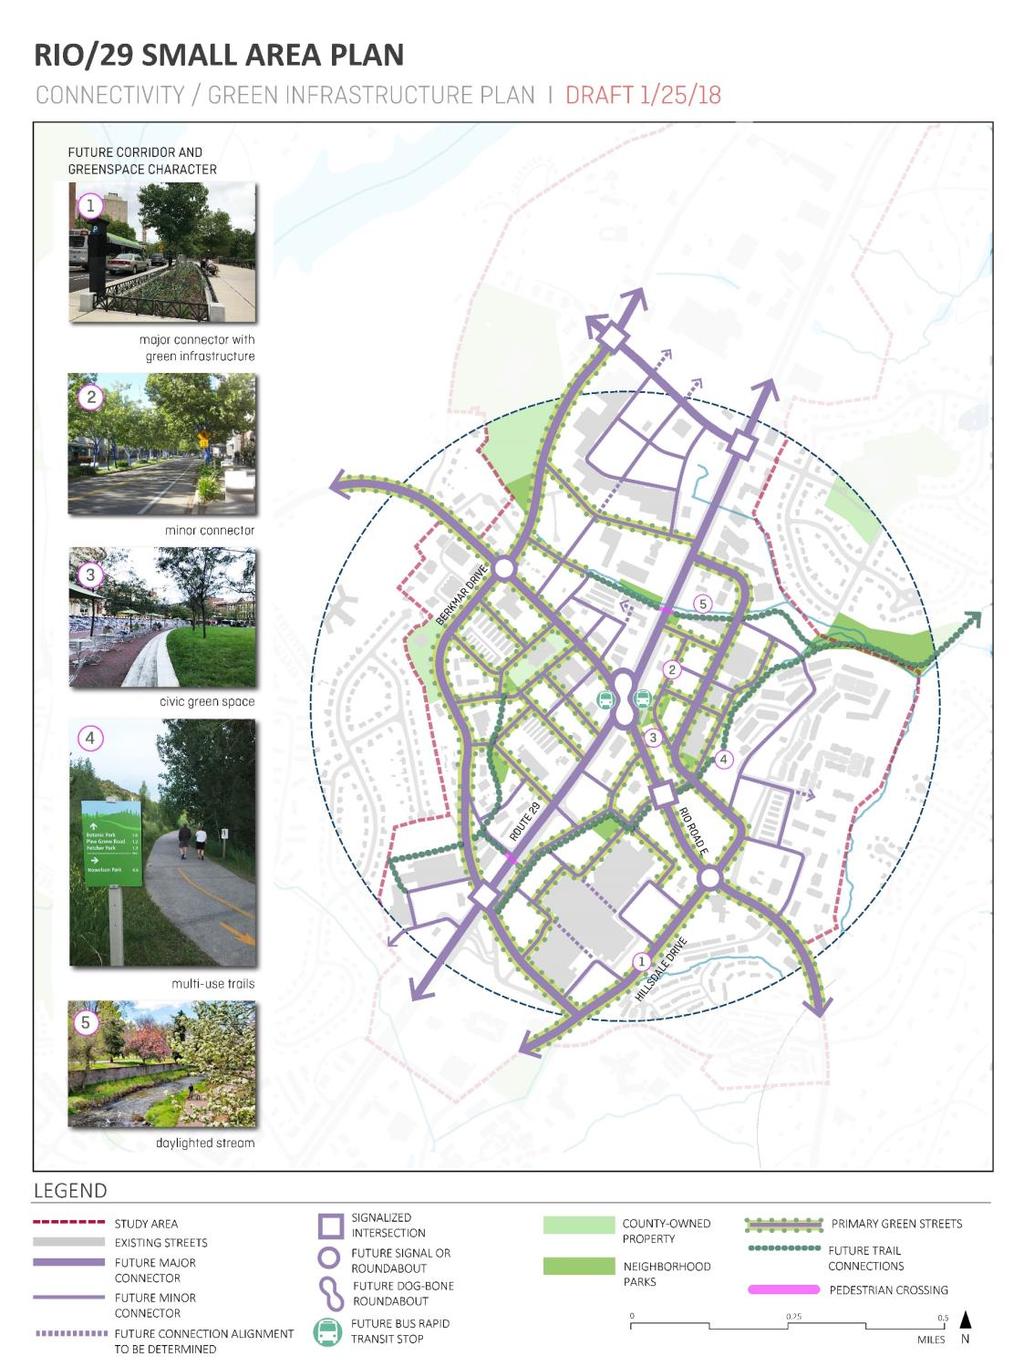 CONNECTIVITY PLAN Revised plan addresses feedback by: Maintaining the popular loop concept Respecting building footprints and property lines Allowing for flexibility in how to connect the grid when